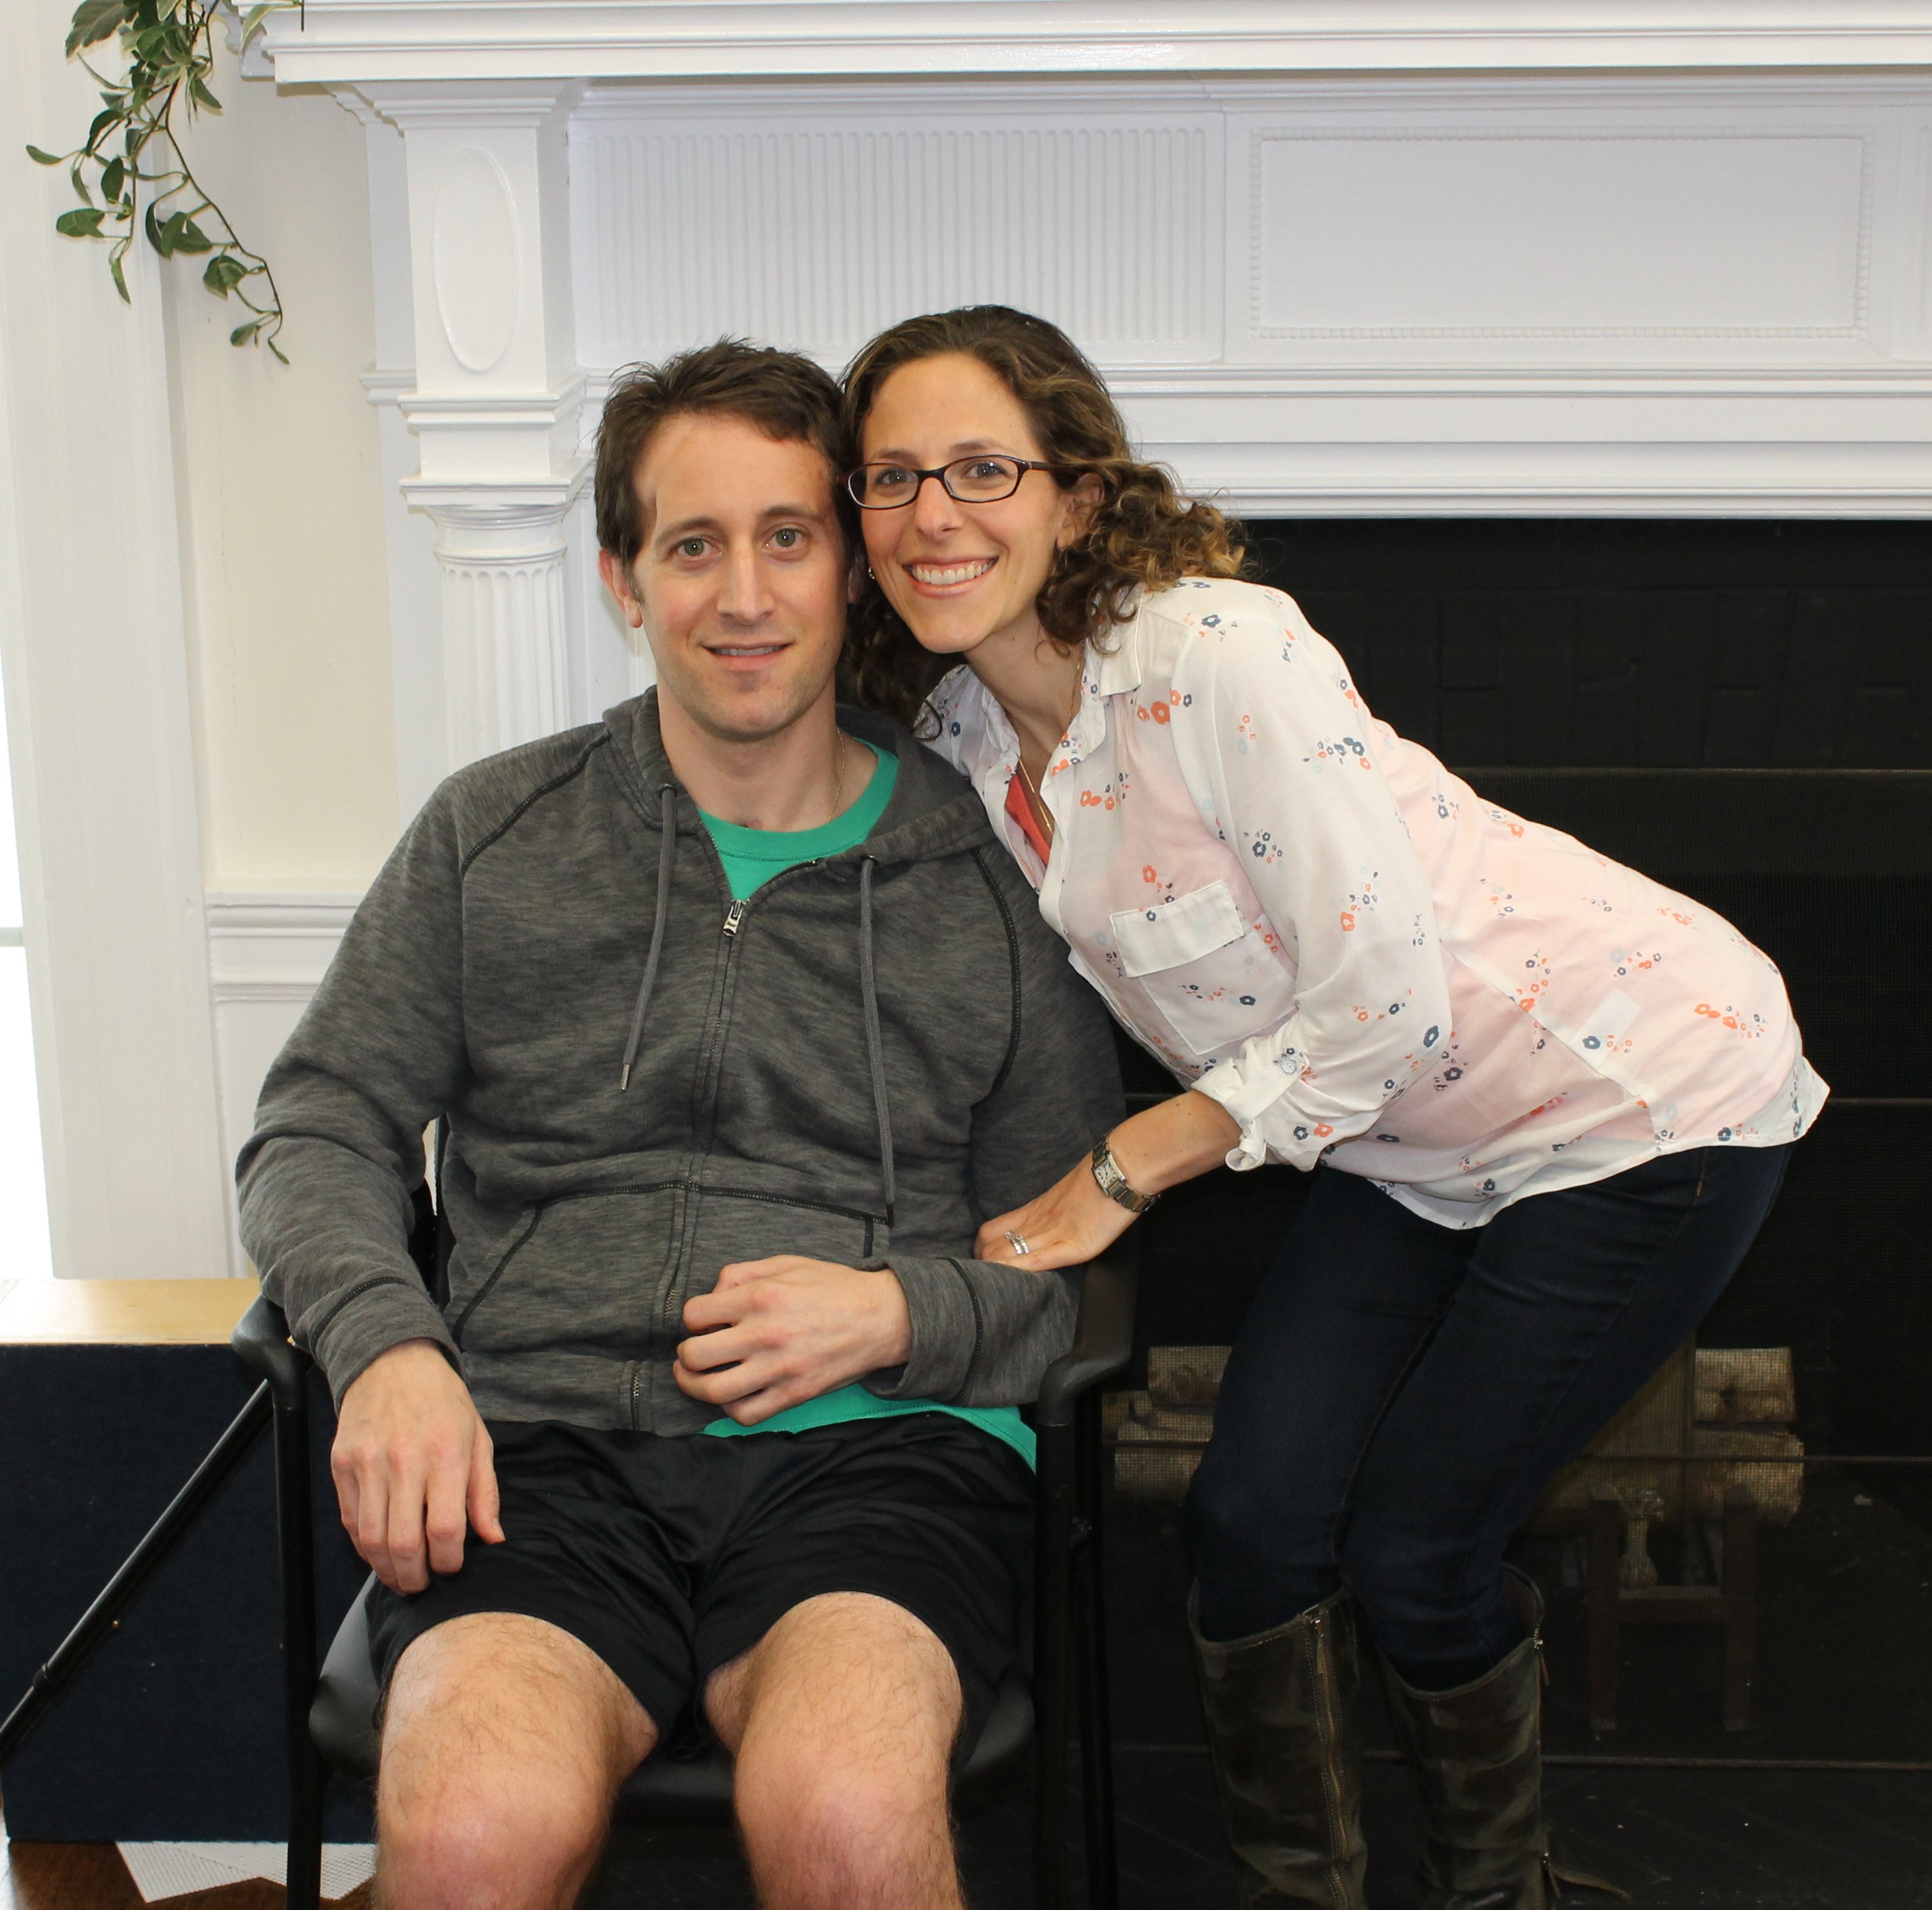 Brad and Jessica Berman, a stroke survivor and his wife, were honored with a Burke Award on June 16. The couple runs a community campaign to benefit Burke’s lower extremity robotics program.